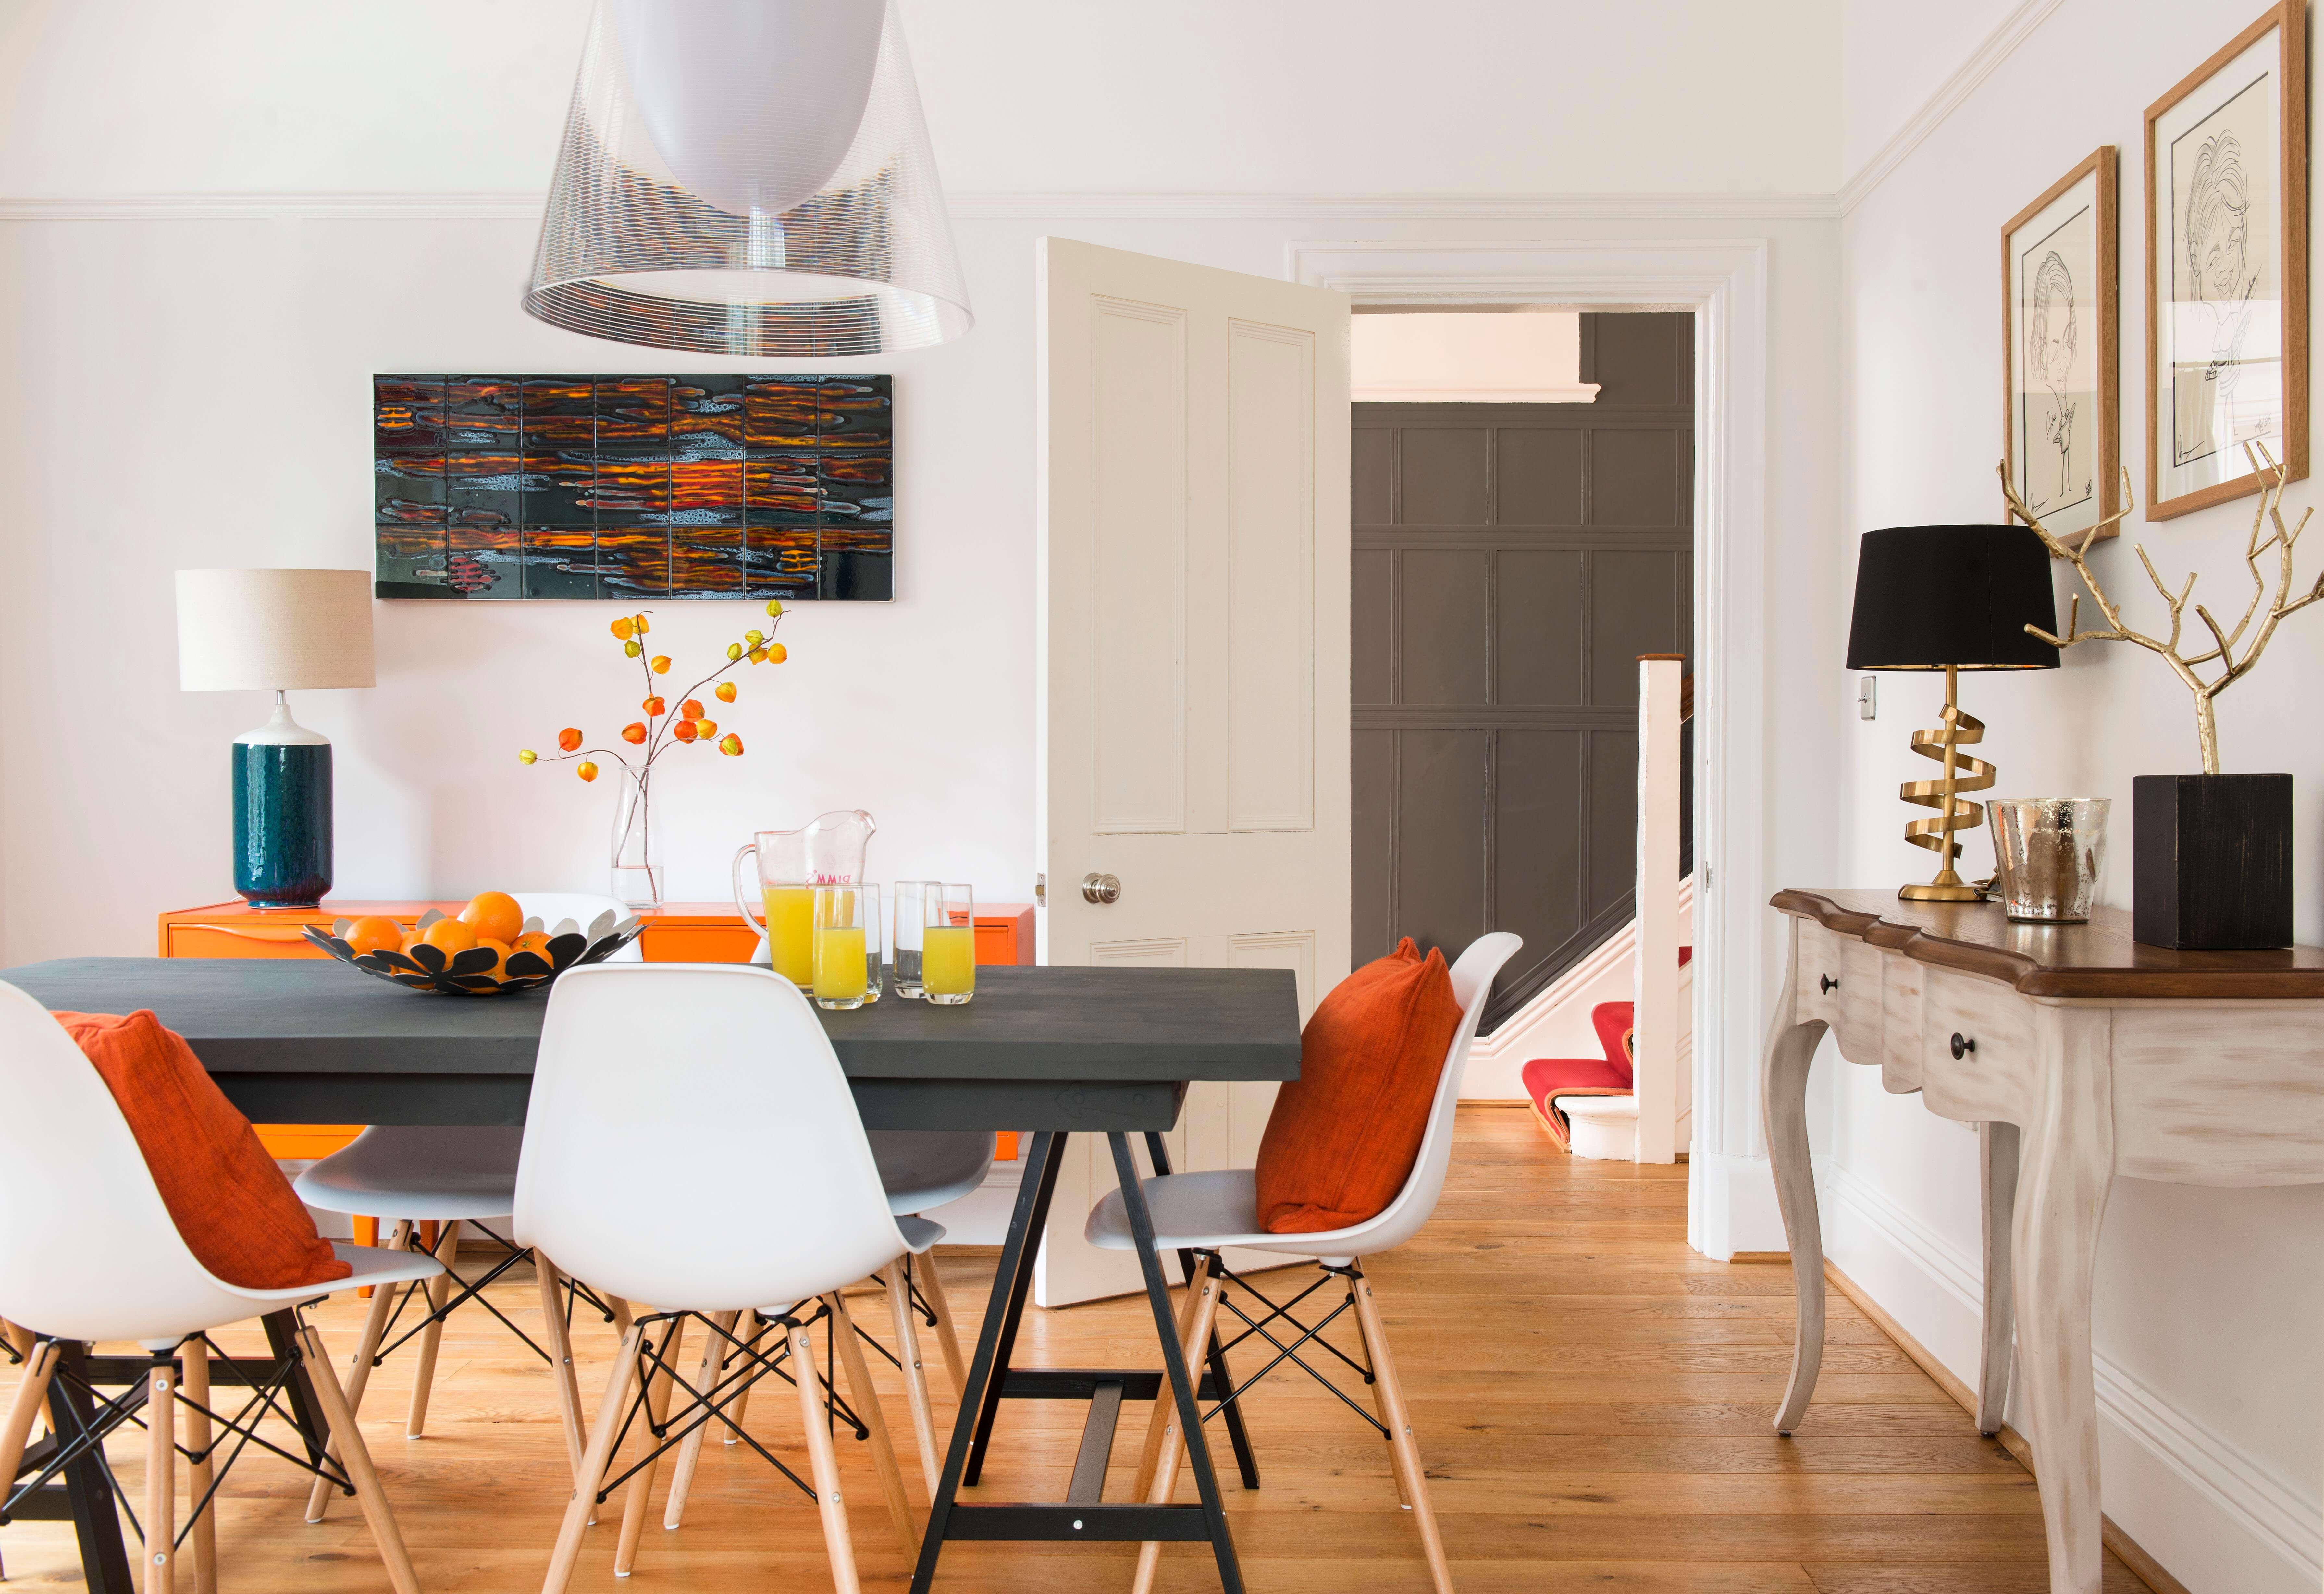 Bright orange pops bring this busy family dining room to life